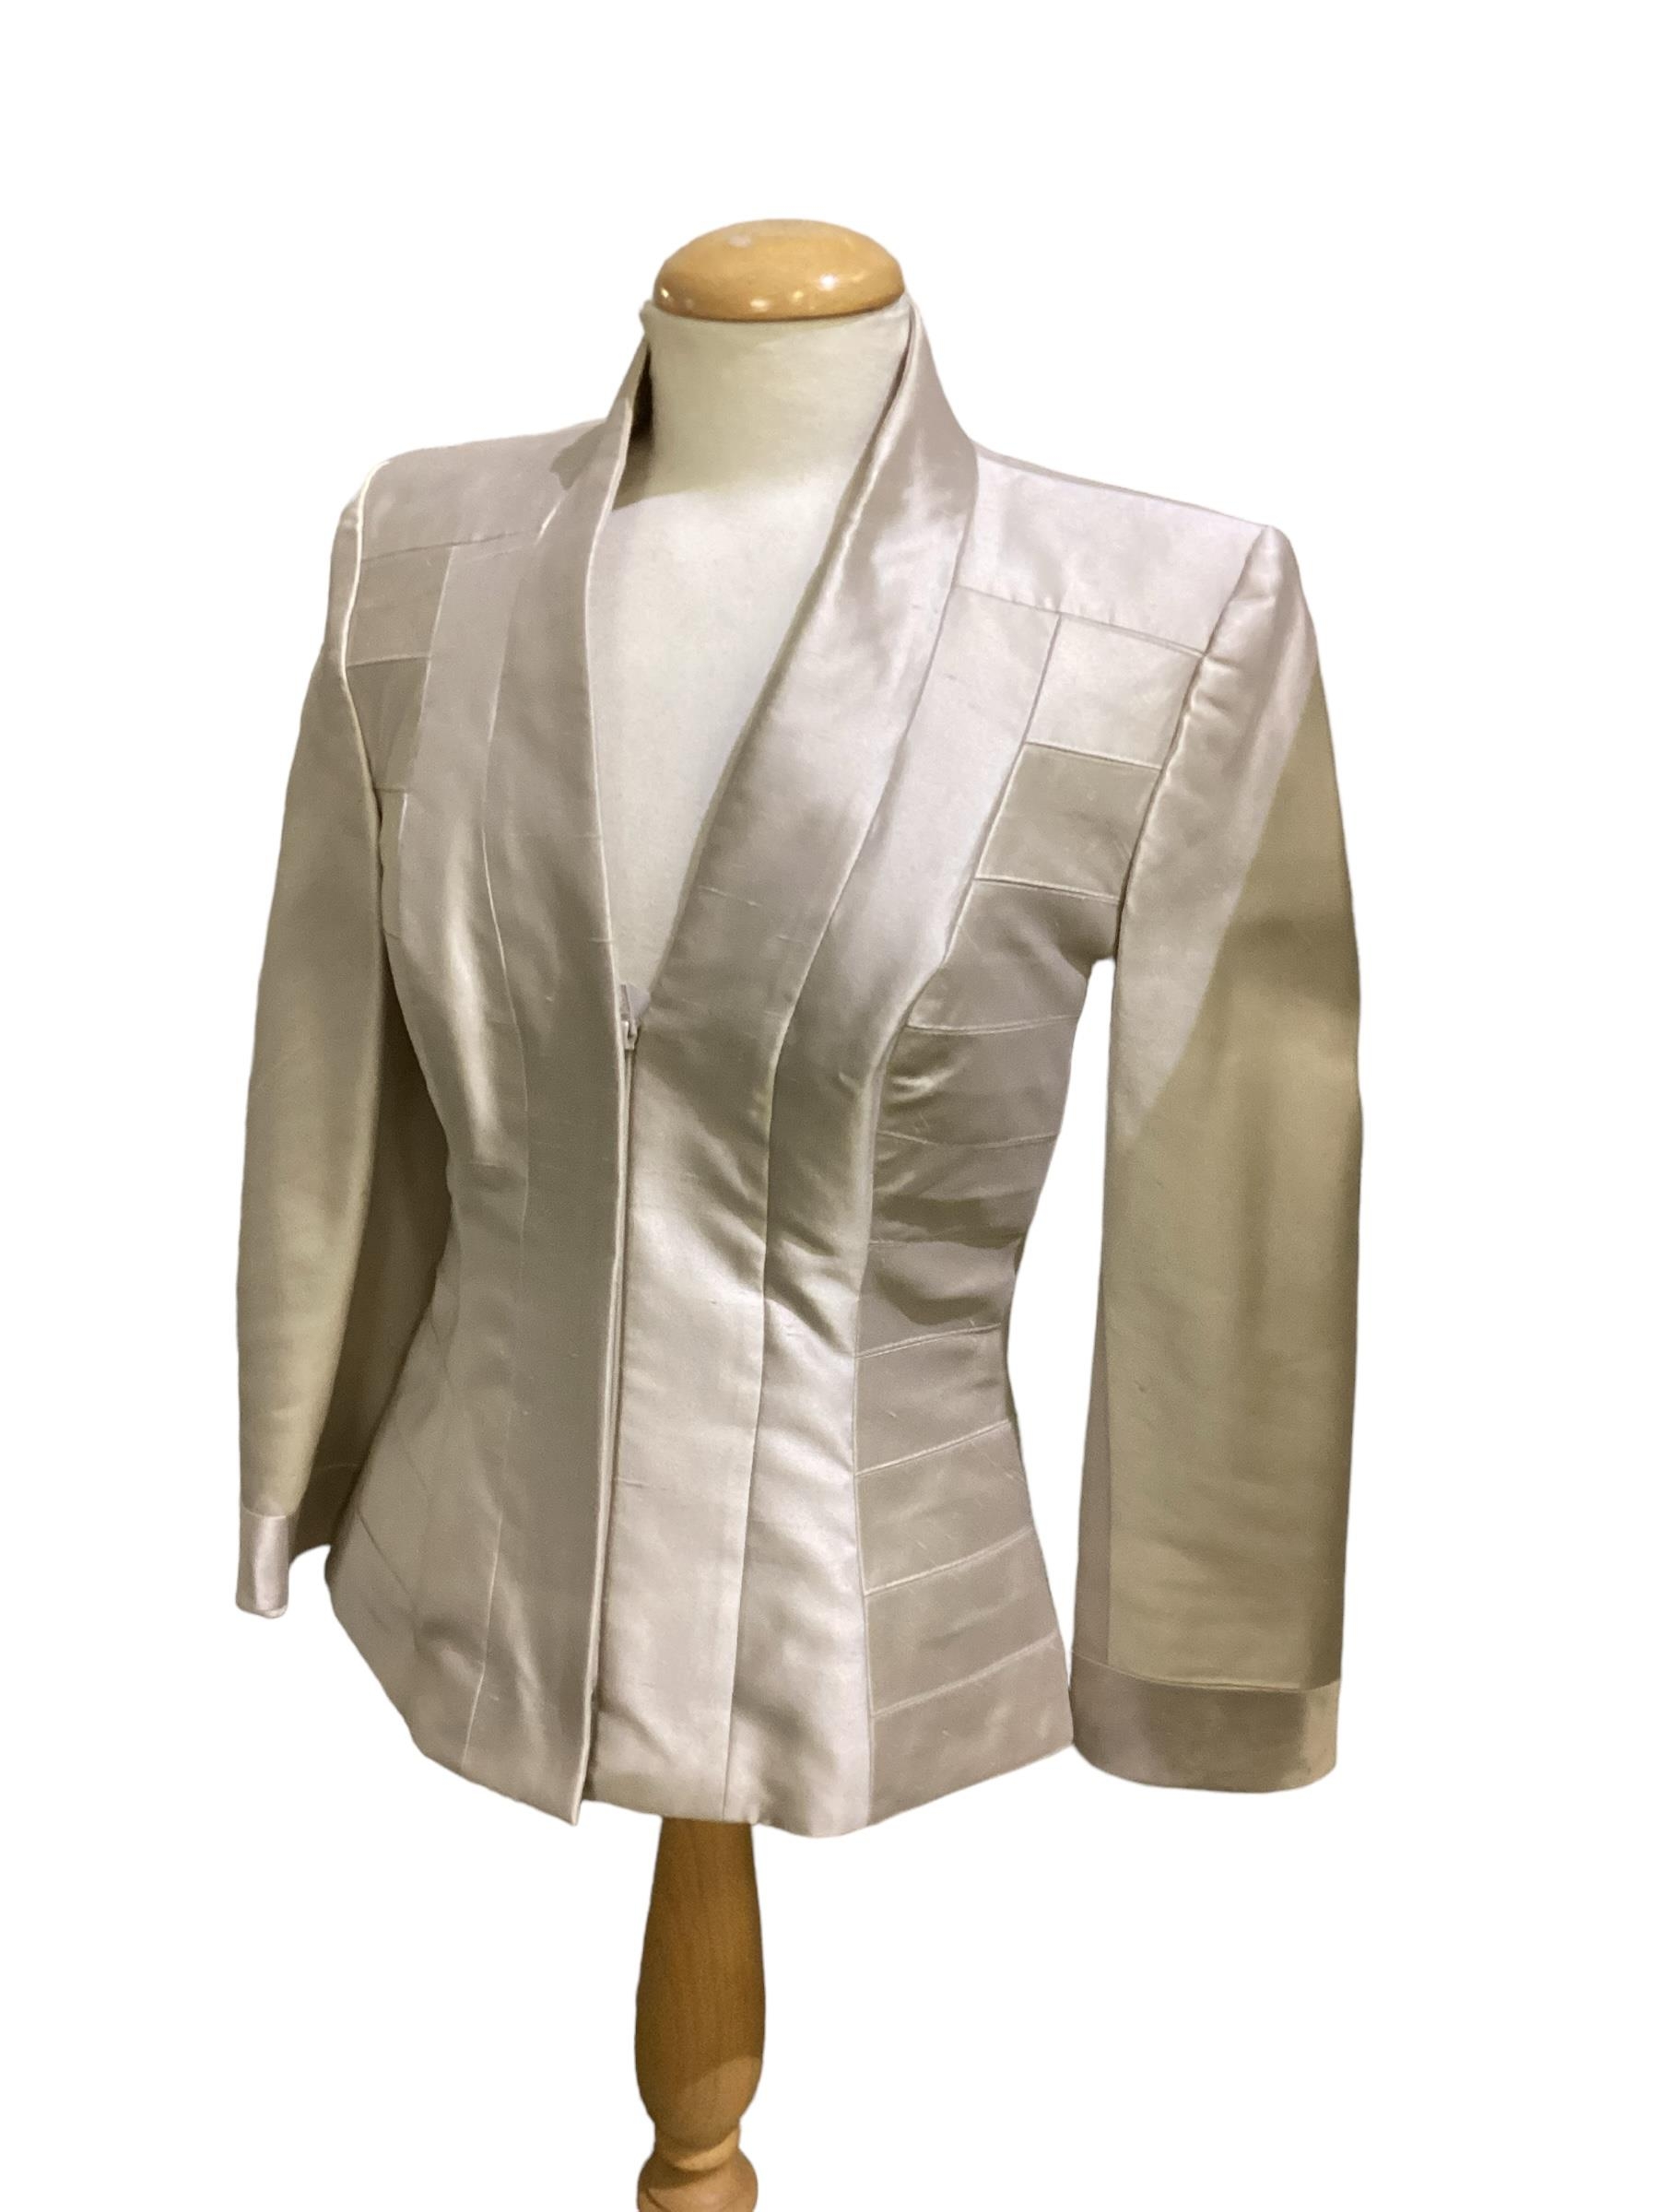 Bruce Oldfield, silk cream suit, couture, cream silk full length dress, condition a mark see - Image 20 of 23